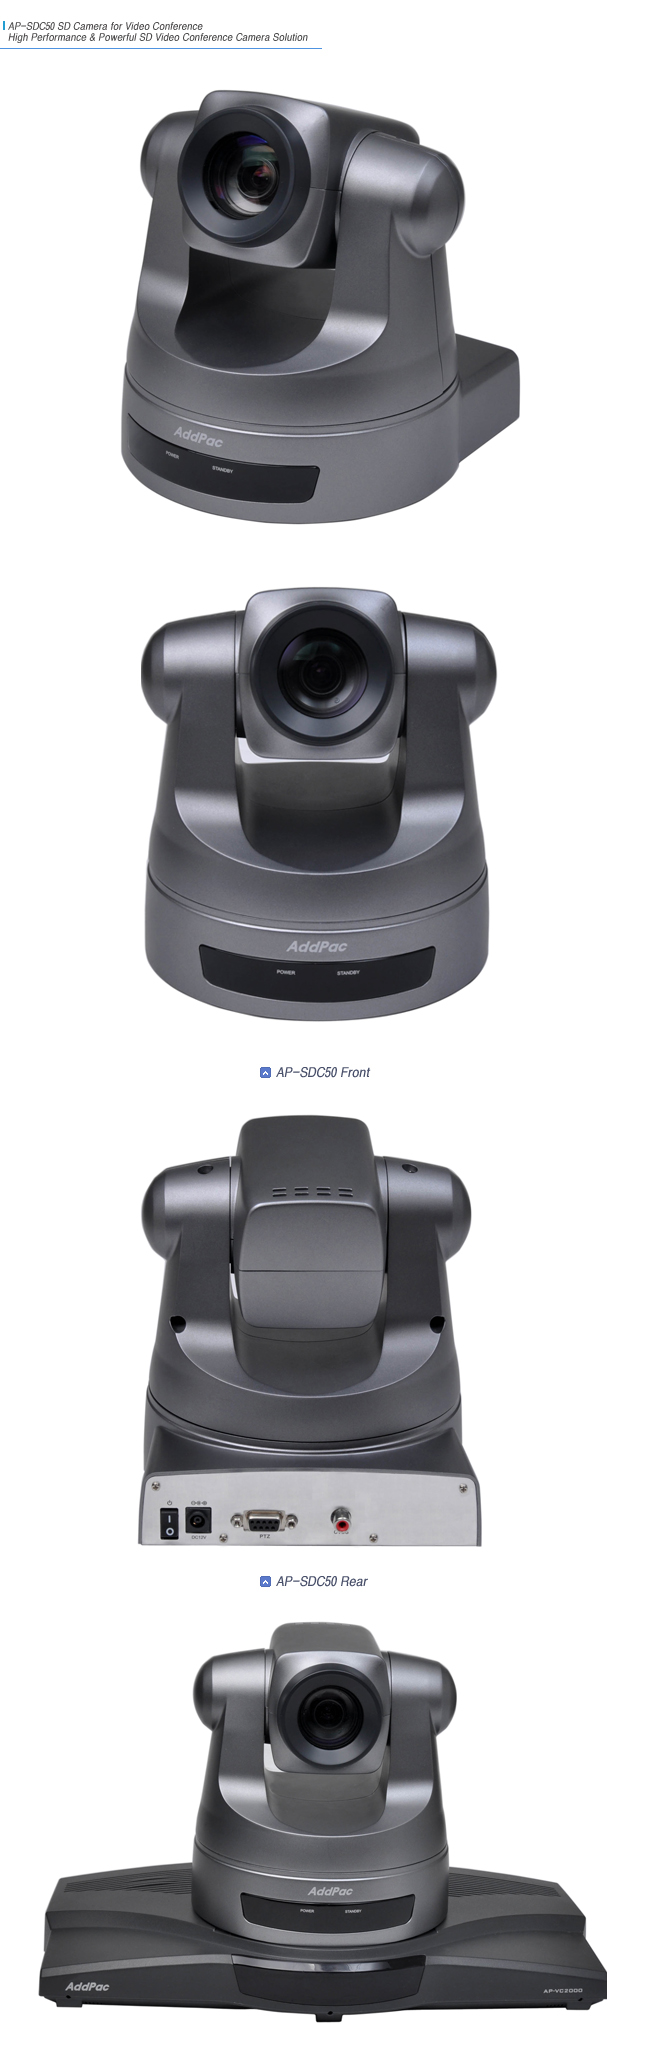 AP-SDC50 SD Video Conference Camera   | AddPac